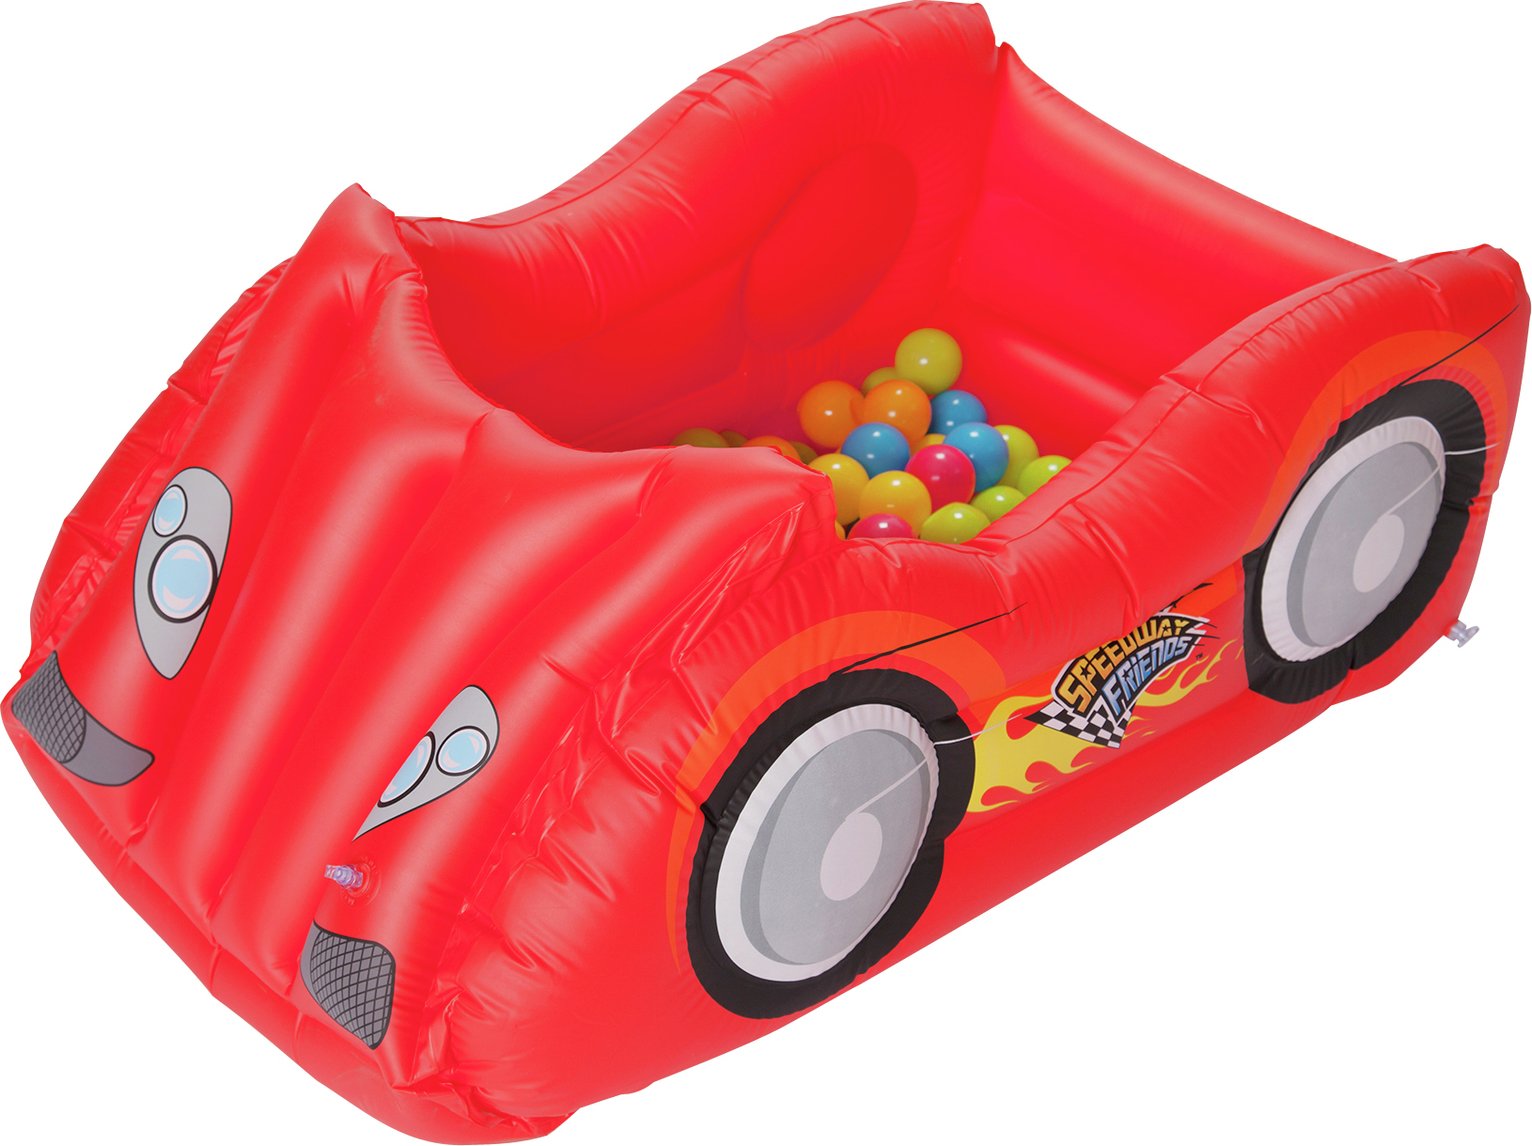 Chad Valley Race Car Ball Pit Review